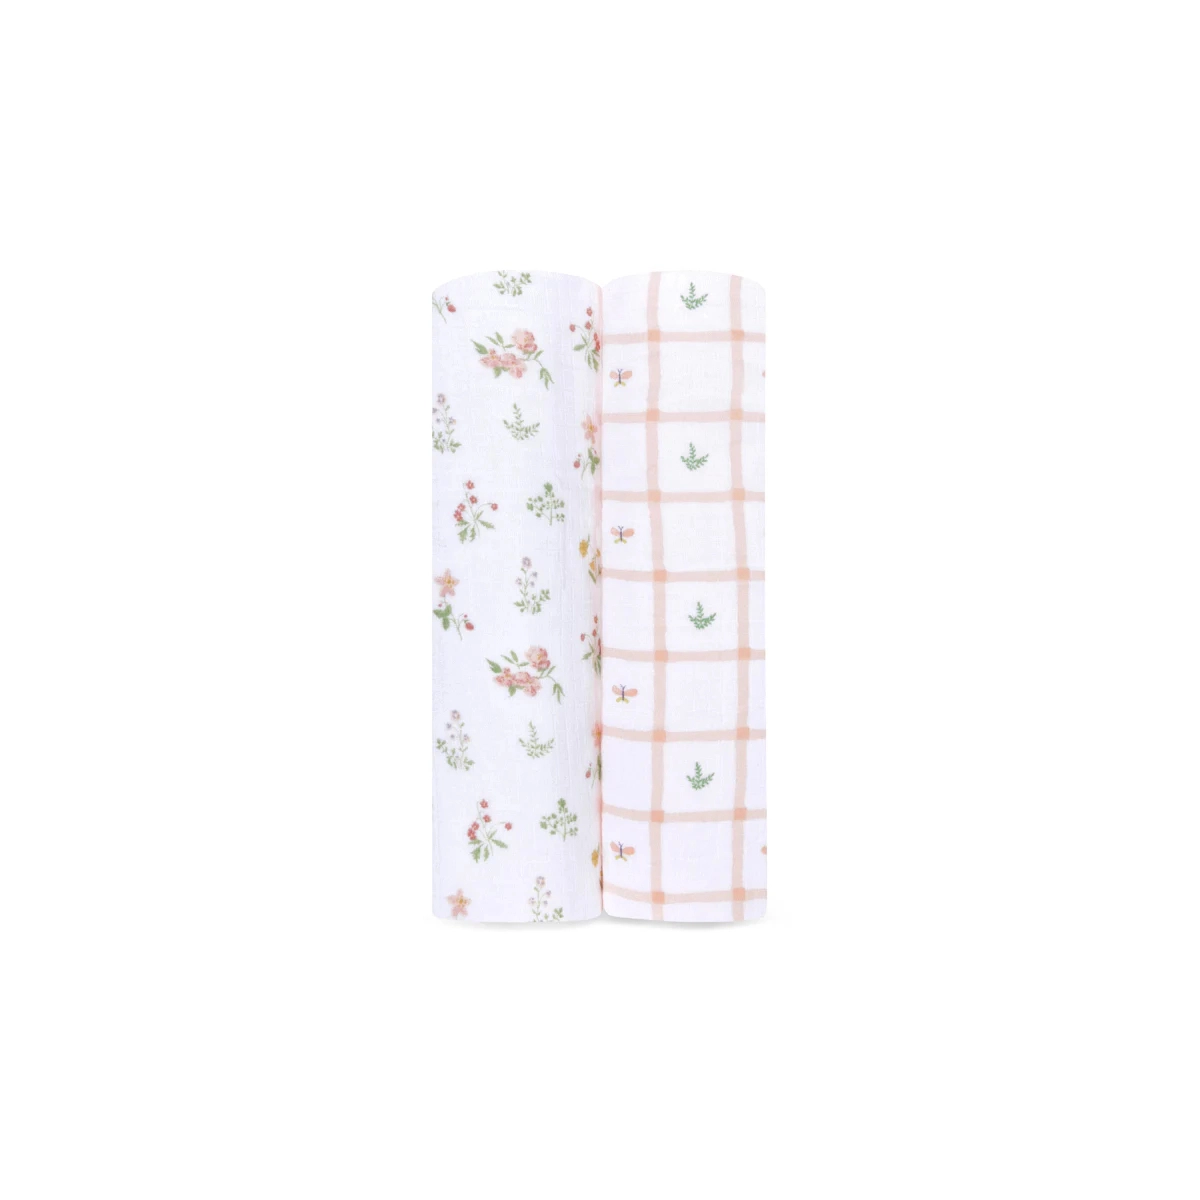 Image of Aden + Anais Pack of 2 Essentials Cotton Muslin Swaddle Blanket - Country Floral (23-19-261)